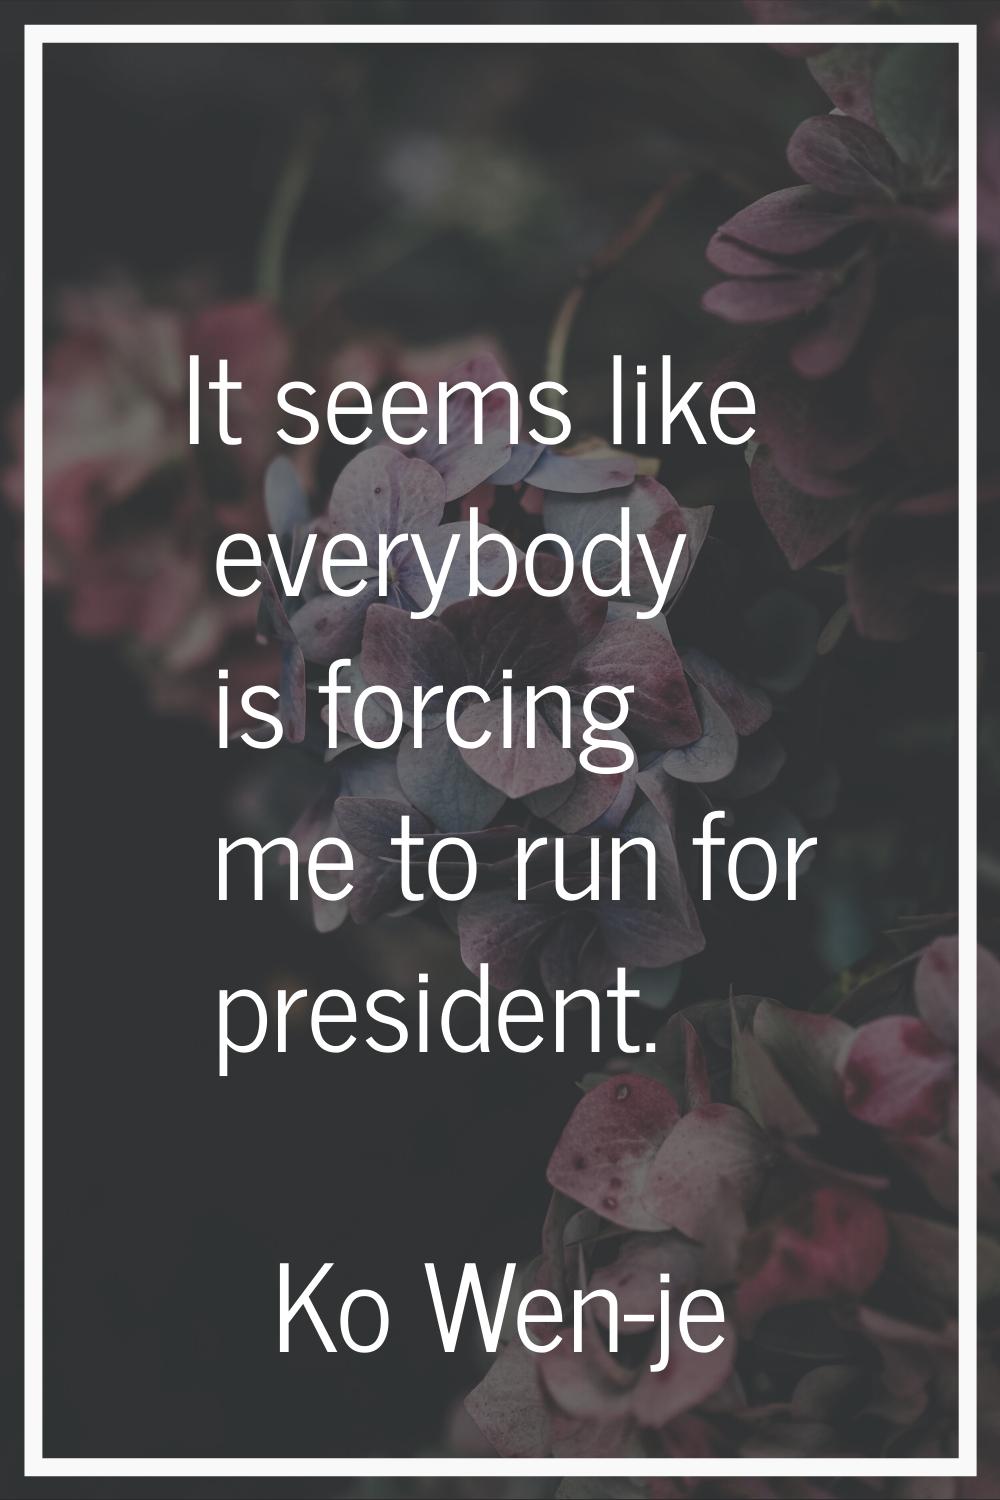 It seems like everybody is forcing me to run for president.